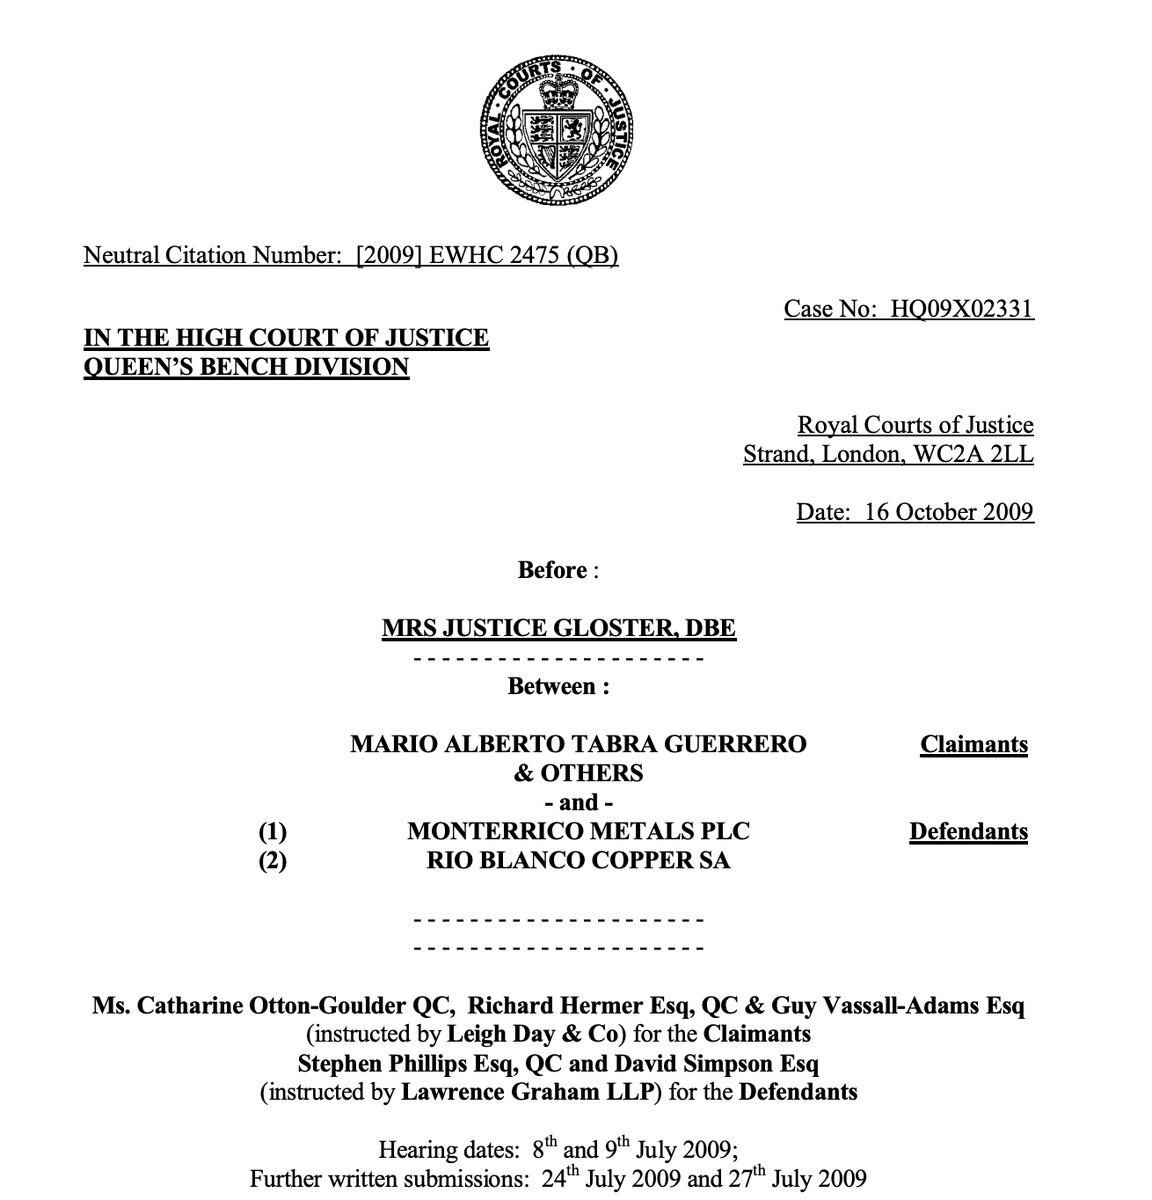 In 2009, the claimants successfully obtained a worldwide freezing injunction from the UK High Court over £5 million of Monterrico’s assets. They also succeeded in obtaining a freezing injunction from the Hong Kong High Court over Monterrico’s assets there. https://www.leighday.co.uk/LeighDay/media/LeighDay/documents/Guerrero-v-Monterrico-QBD-16-10-09.pdf?ext=.pdf